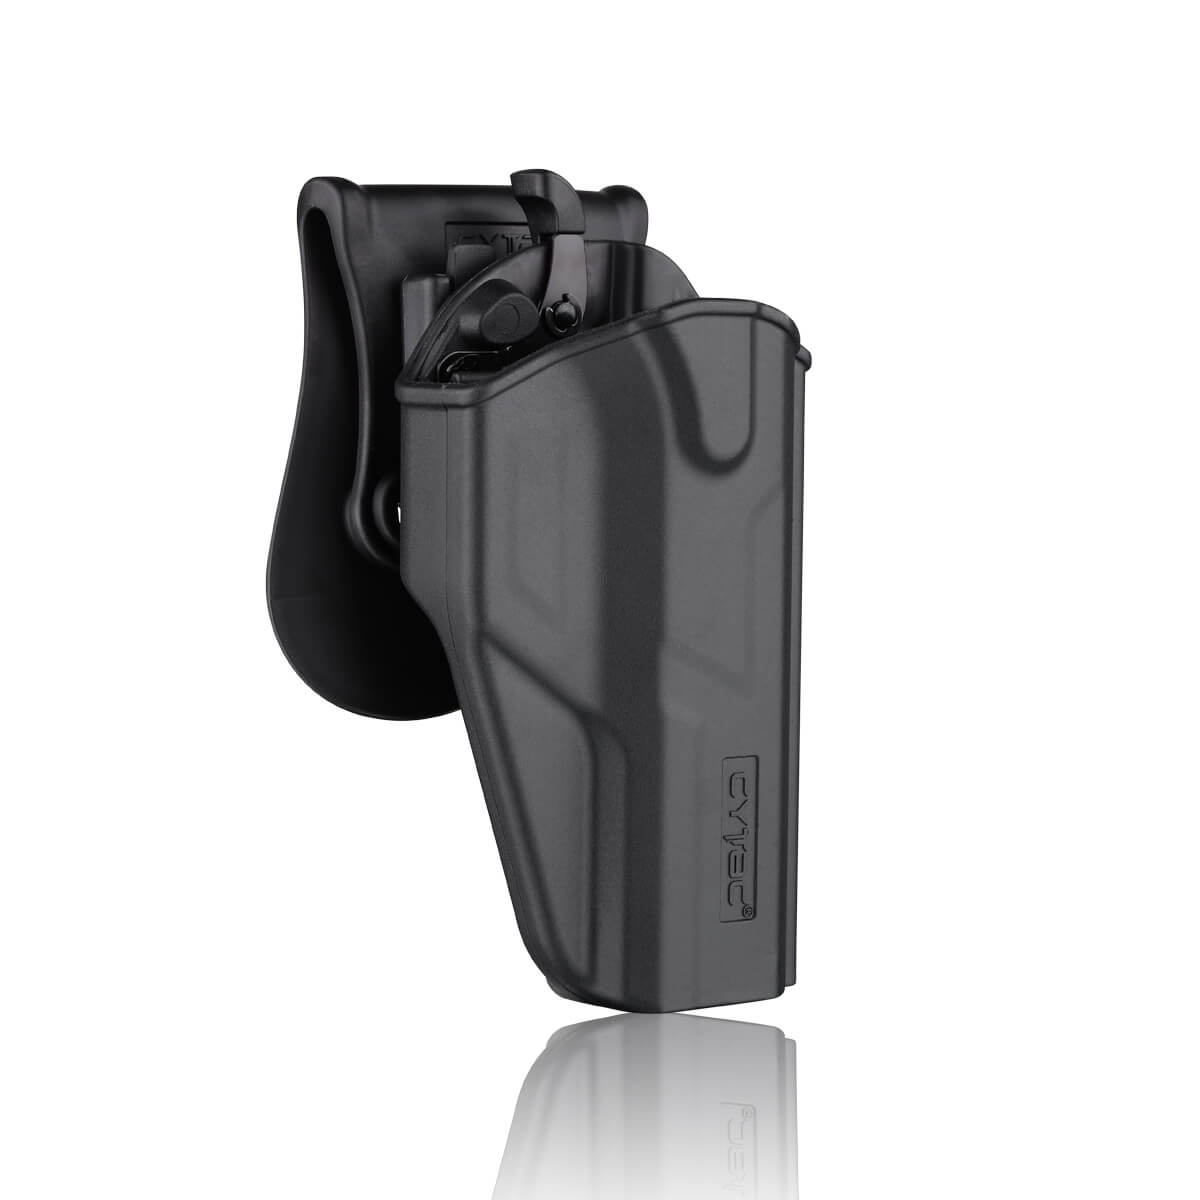 Details about   CYTAC Level II Thumb Release Holster fits TAURUS PT-709 w/ FREE single mag pouch 